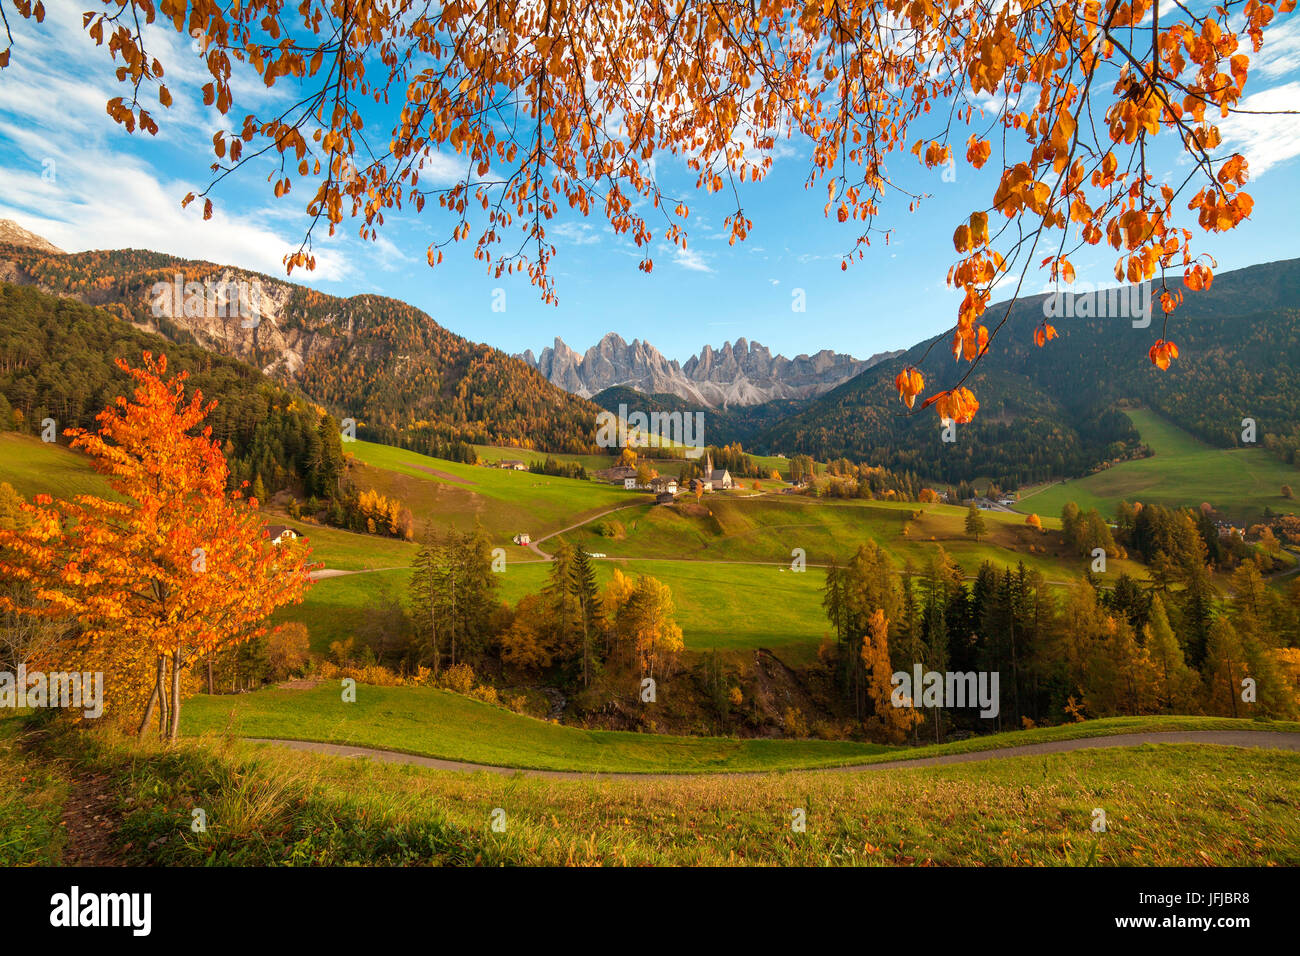 Val di Funes with the village of Santa Maddalena, In the background the Odle, in this picture naturally framed by the colors of autumn leaves, South Tyrol, Dolomites, A classic view of the Dolomites with green lawns, trees with bright colors and azure sky, Stock Photo